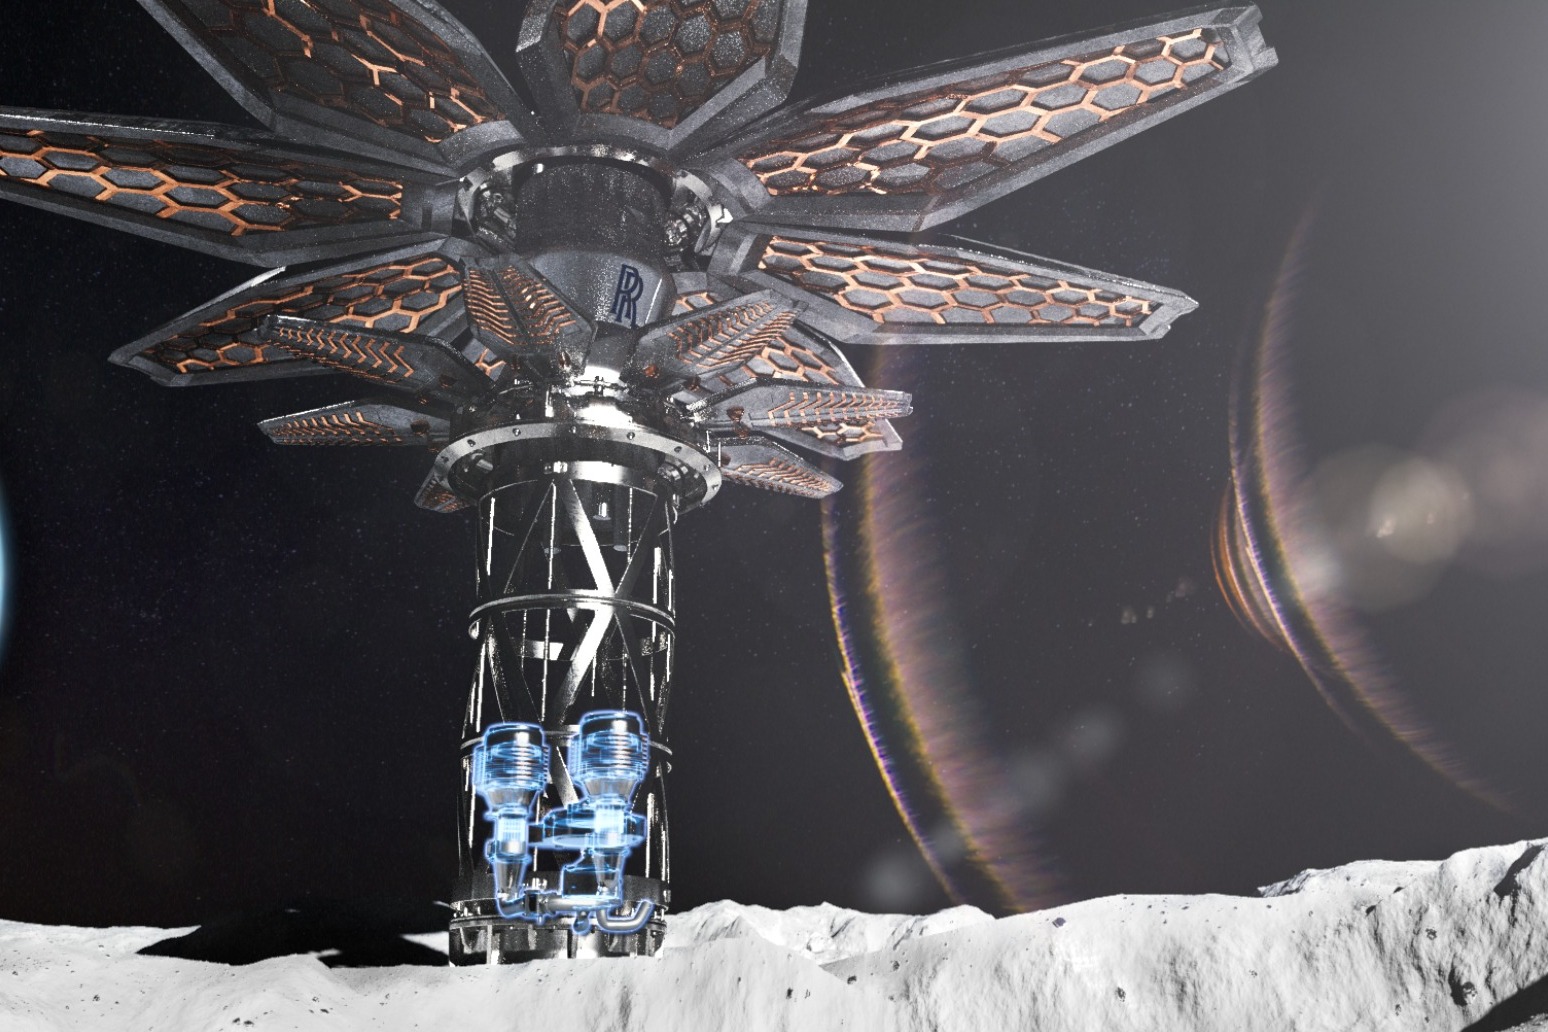 New funding to help develop space power station and create water hunting robot